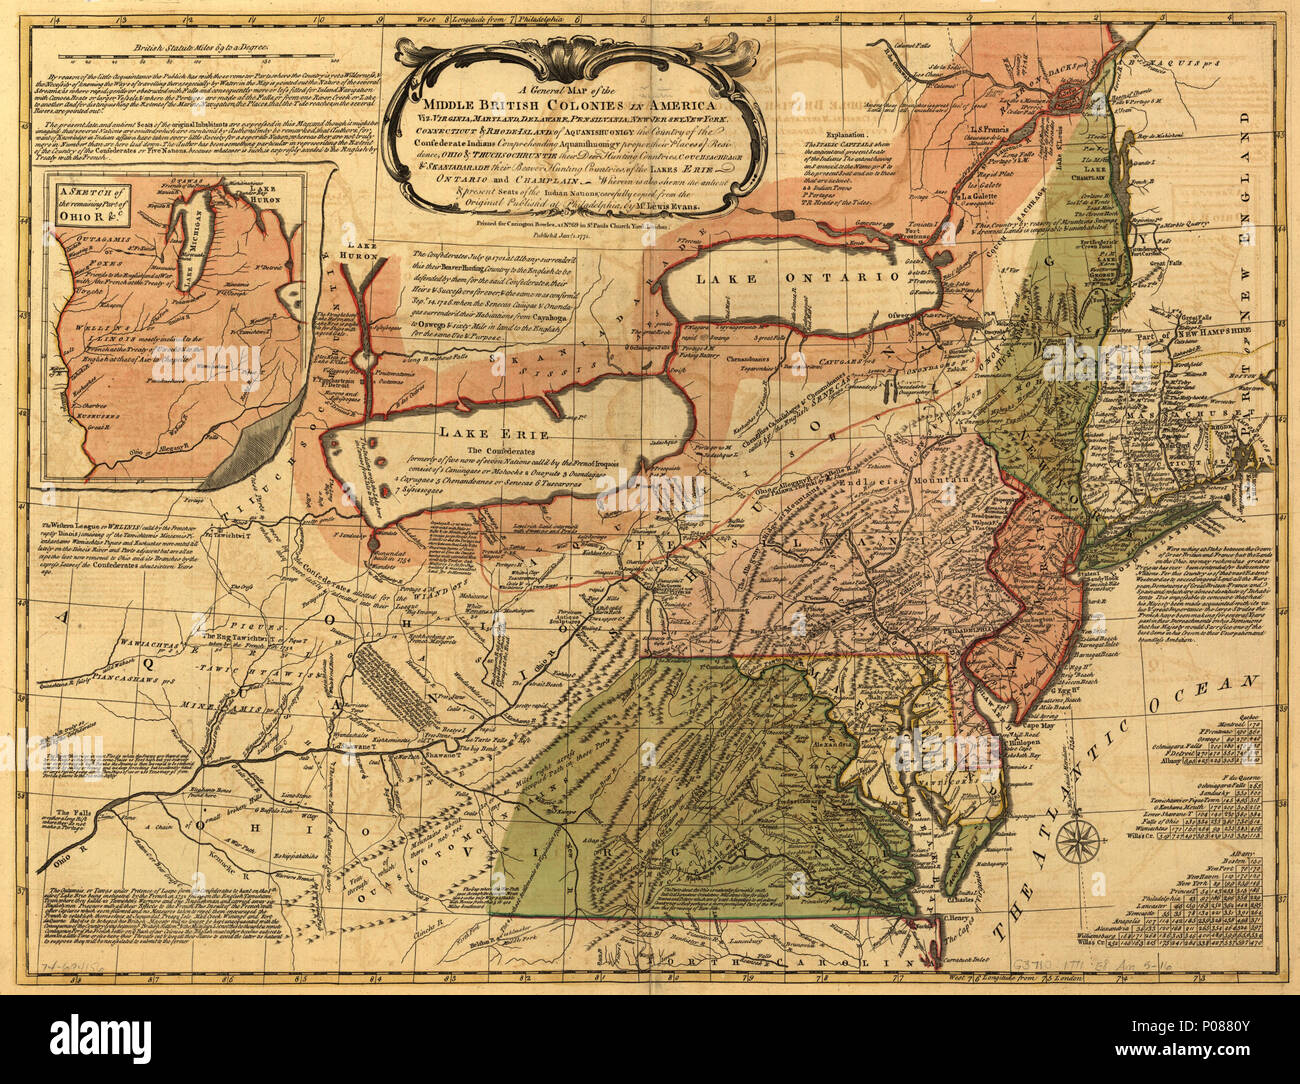 107 A general map of the middle British colonies in America, viz. Virginia, Maryland, Delaware, Pensilvania, New-Jersey, New York, Connecticut &amp; Rhode-Island- Of Aquanishuonigy the country of the LOC 74694156 Stock Photo